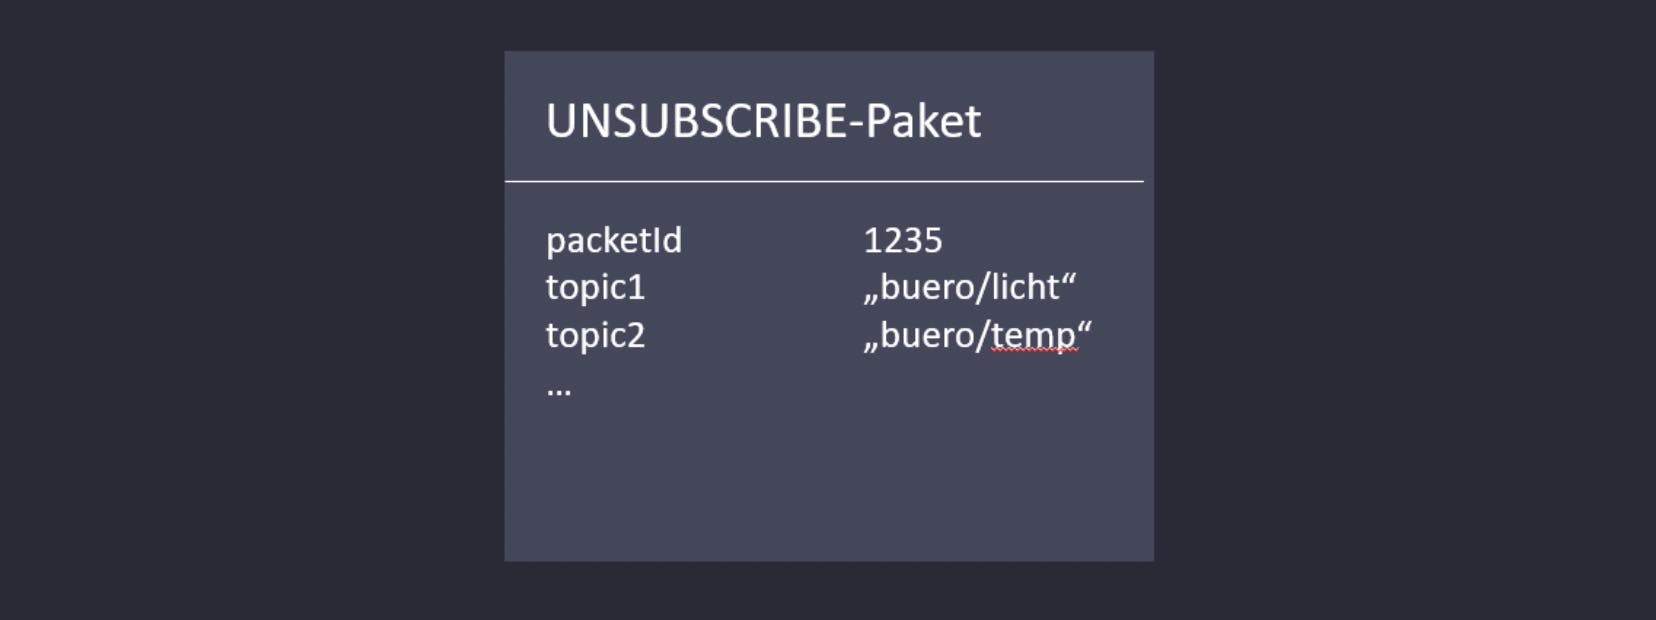 Example of a Unsubscribe package